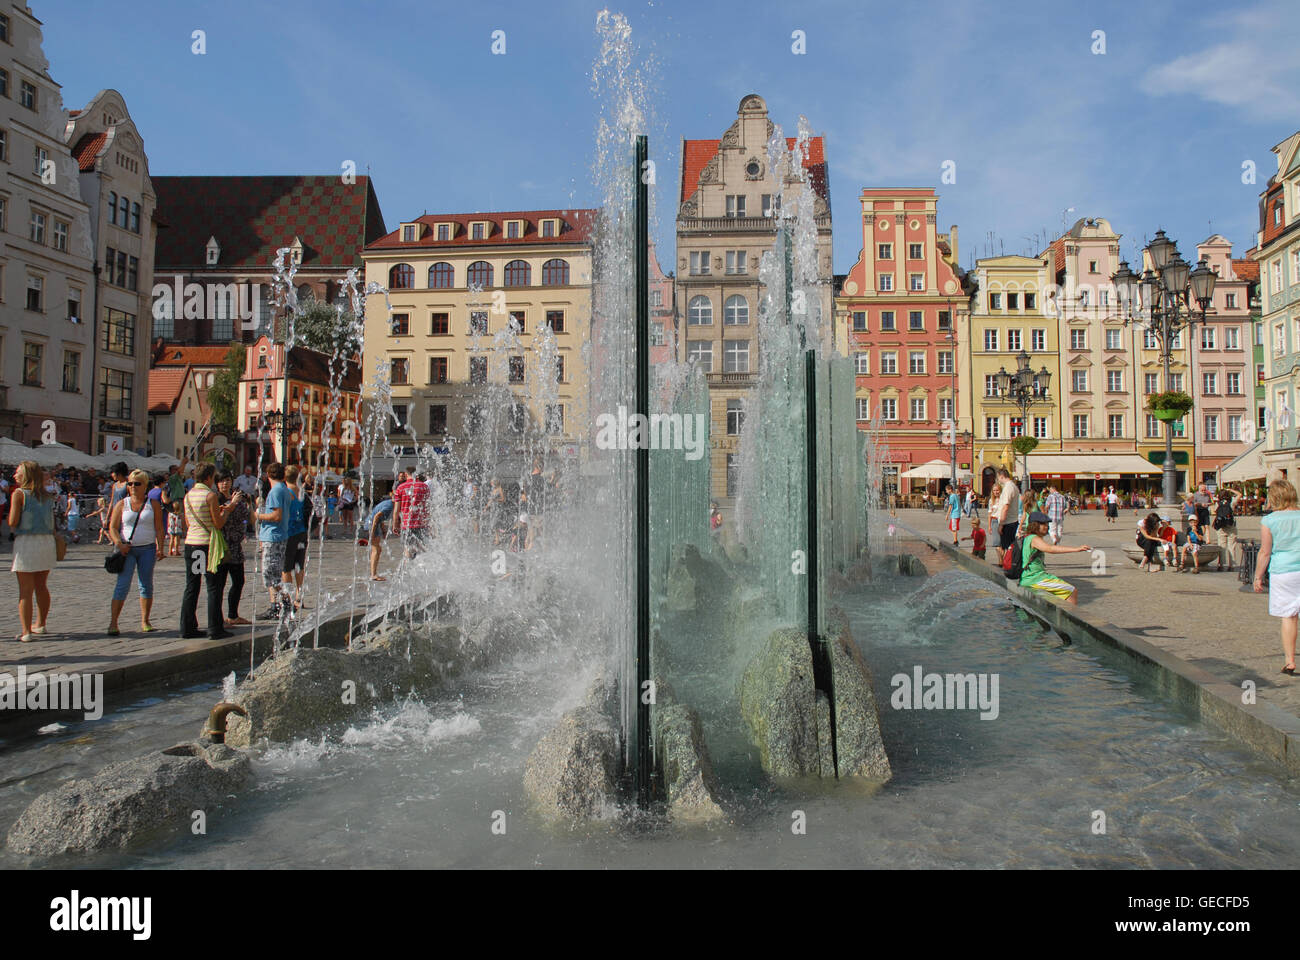 Water fountain in the Market Square (Rynek) on a hot summer's day, Wroclaw, Silesia, Poland. Stock Photo